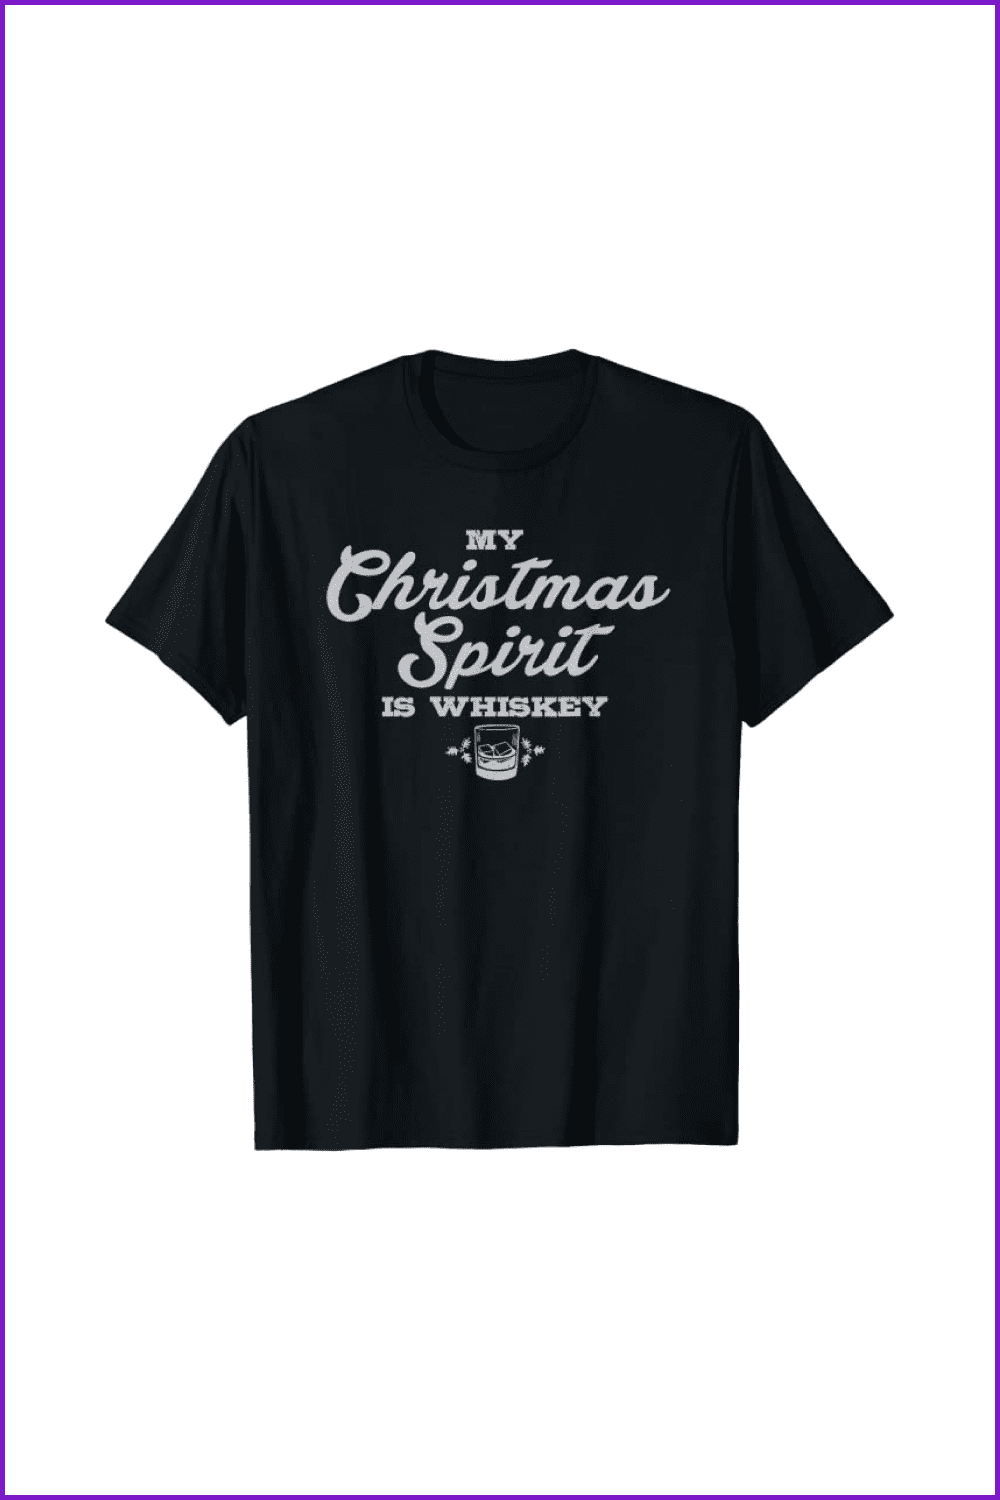 Black t-shirt with the glass of whiskey on the black background with the word Christmas.